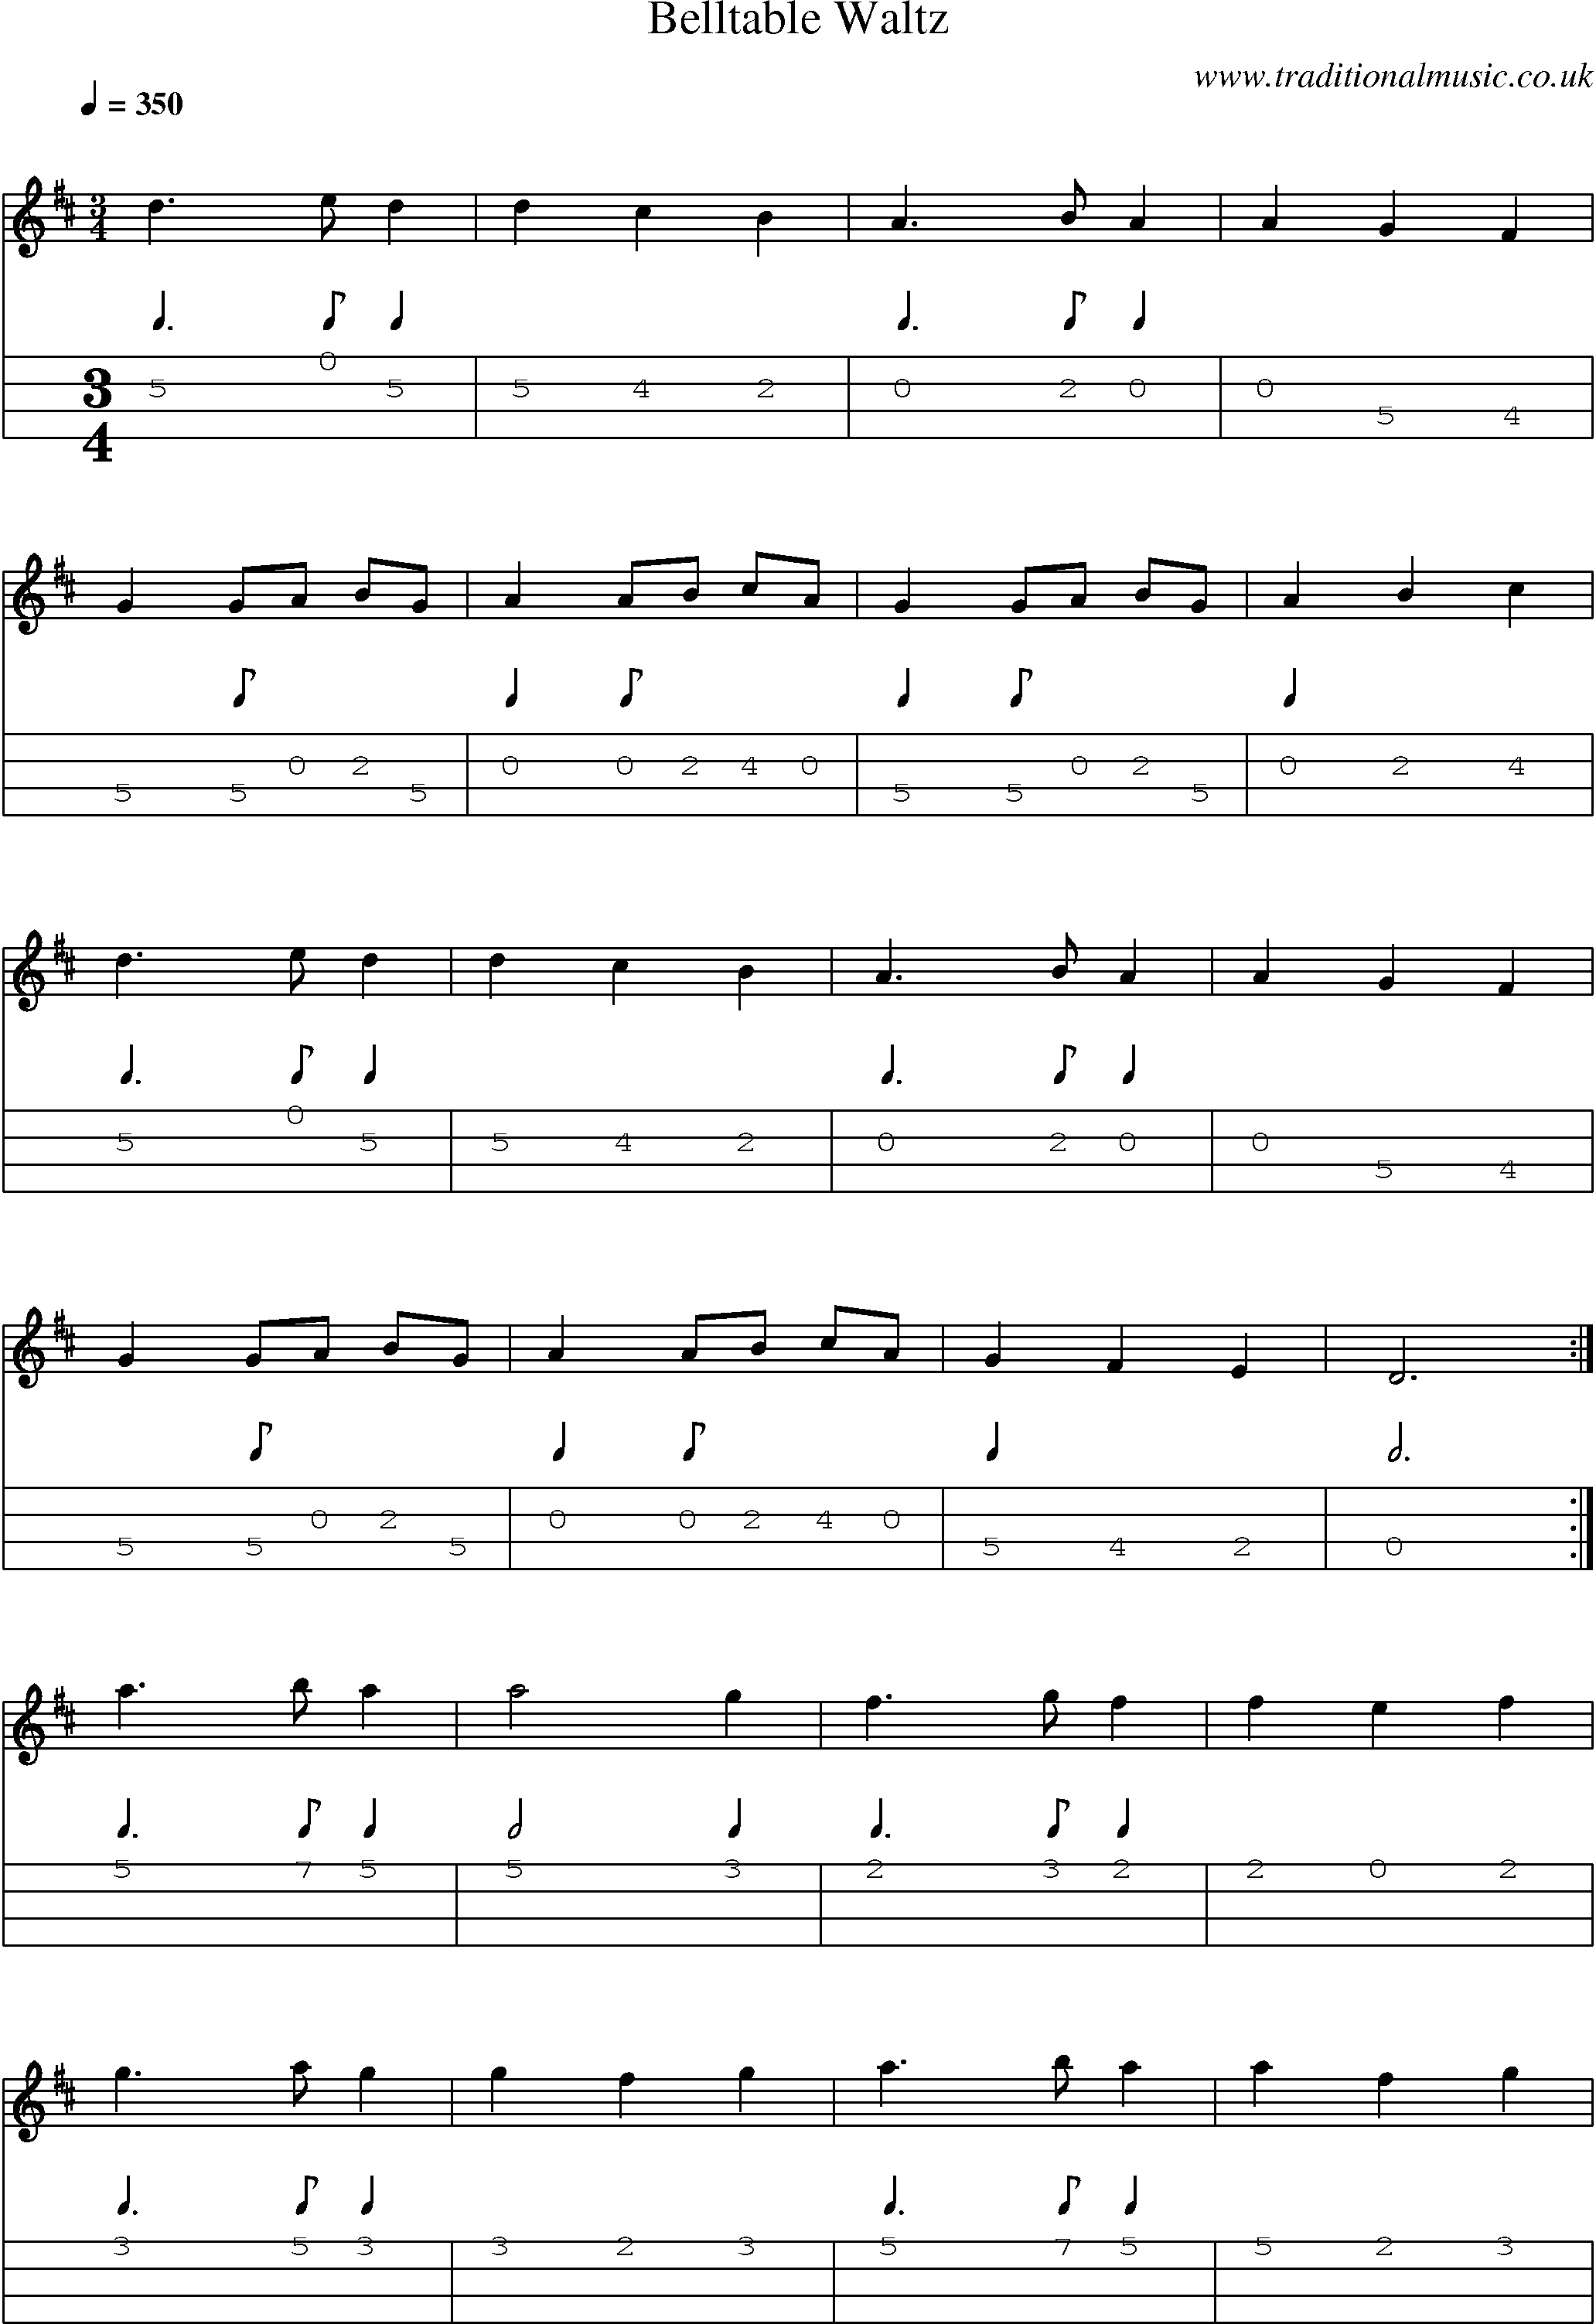 Music Score and Mandolin Tabs for Belltable Waltz